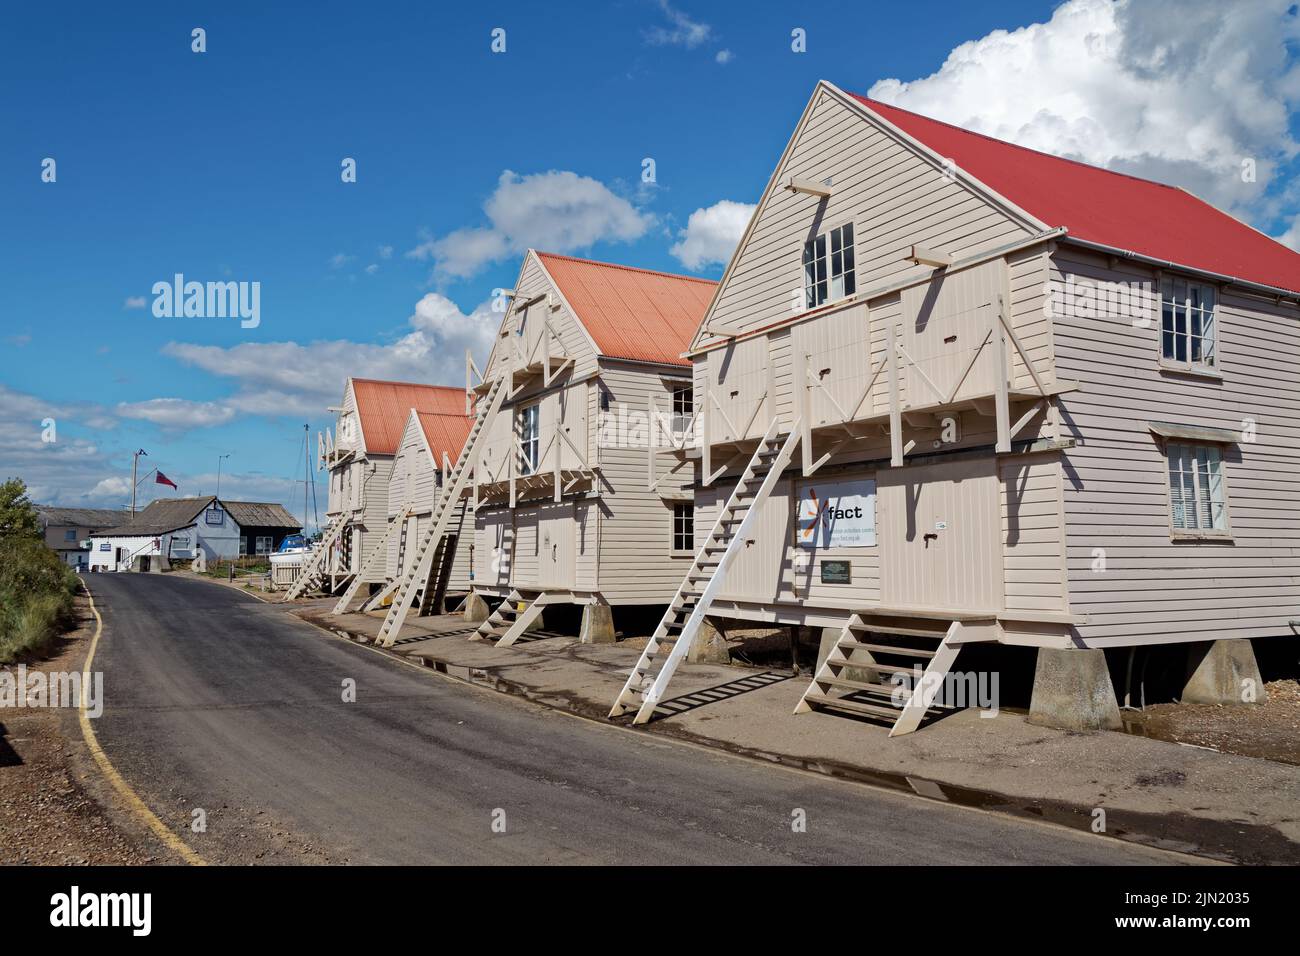 The Sail lofts at Tollesbury, Essex, England. Stock Photo